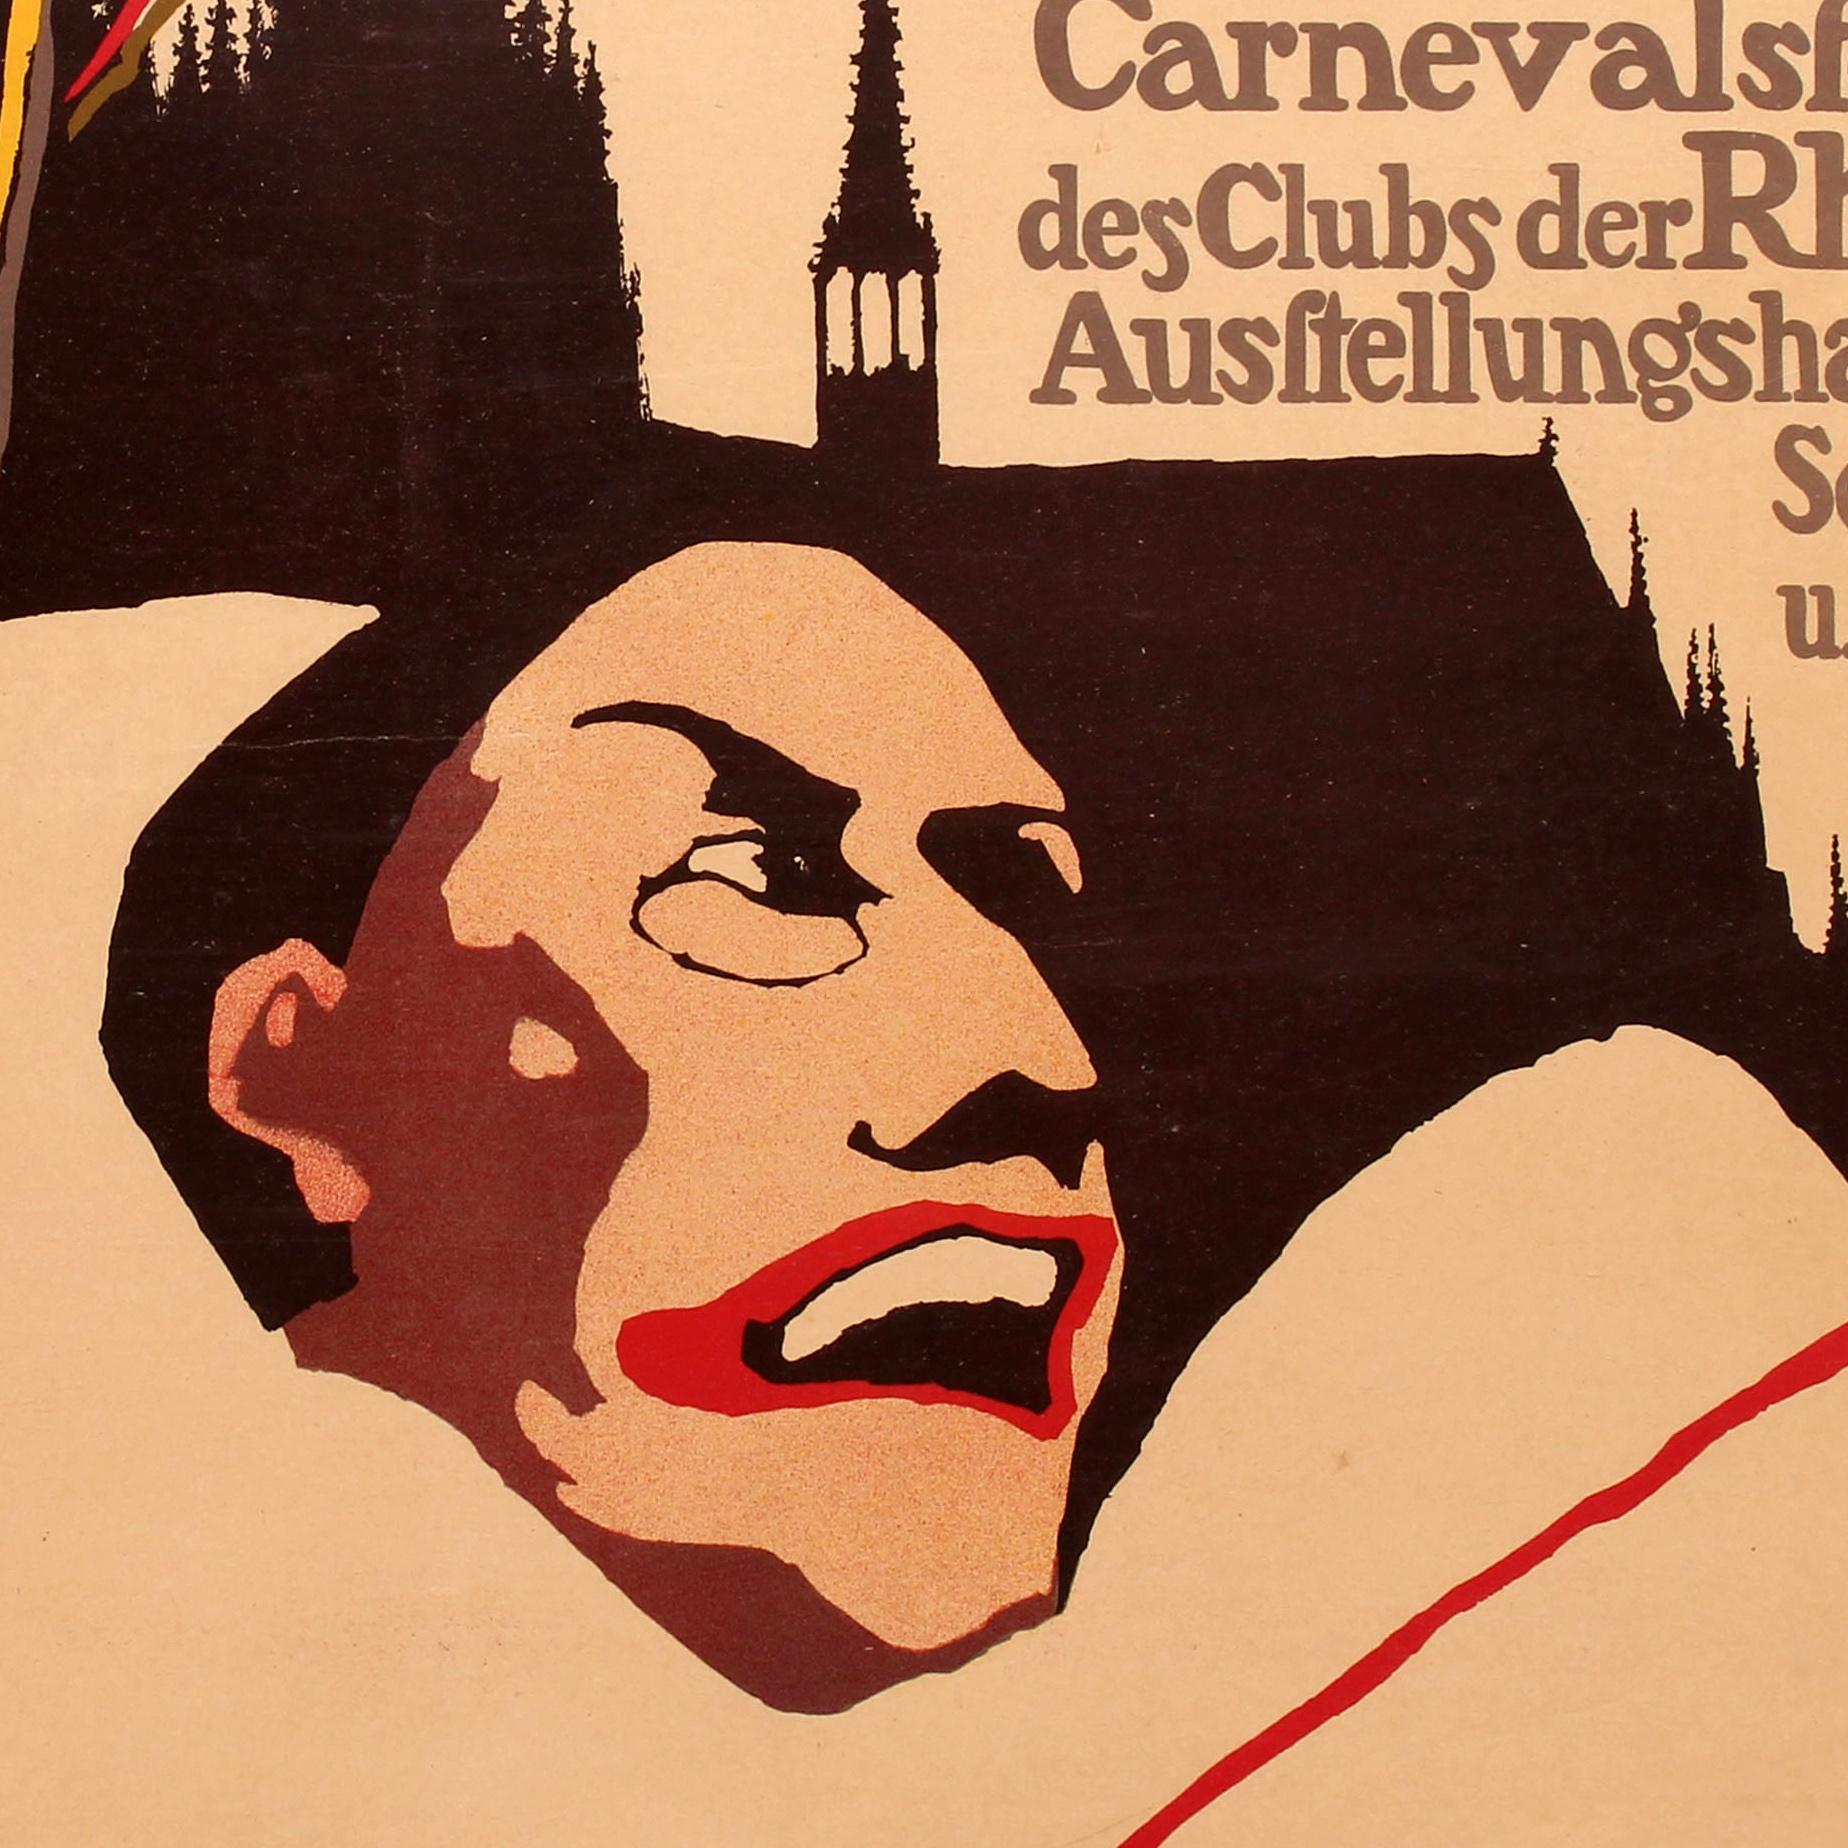 Original antique advertising poster promoting the Carnevalsfeste des Clubs der Rheinlander Koln - the annual Cologne carnival festival in February over the Faschingsdienstag (Shrove Tuesday) week featuring a great design of a man dressed as a